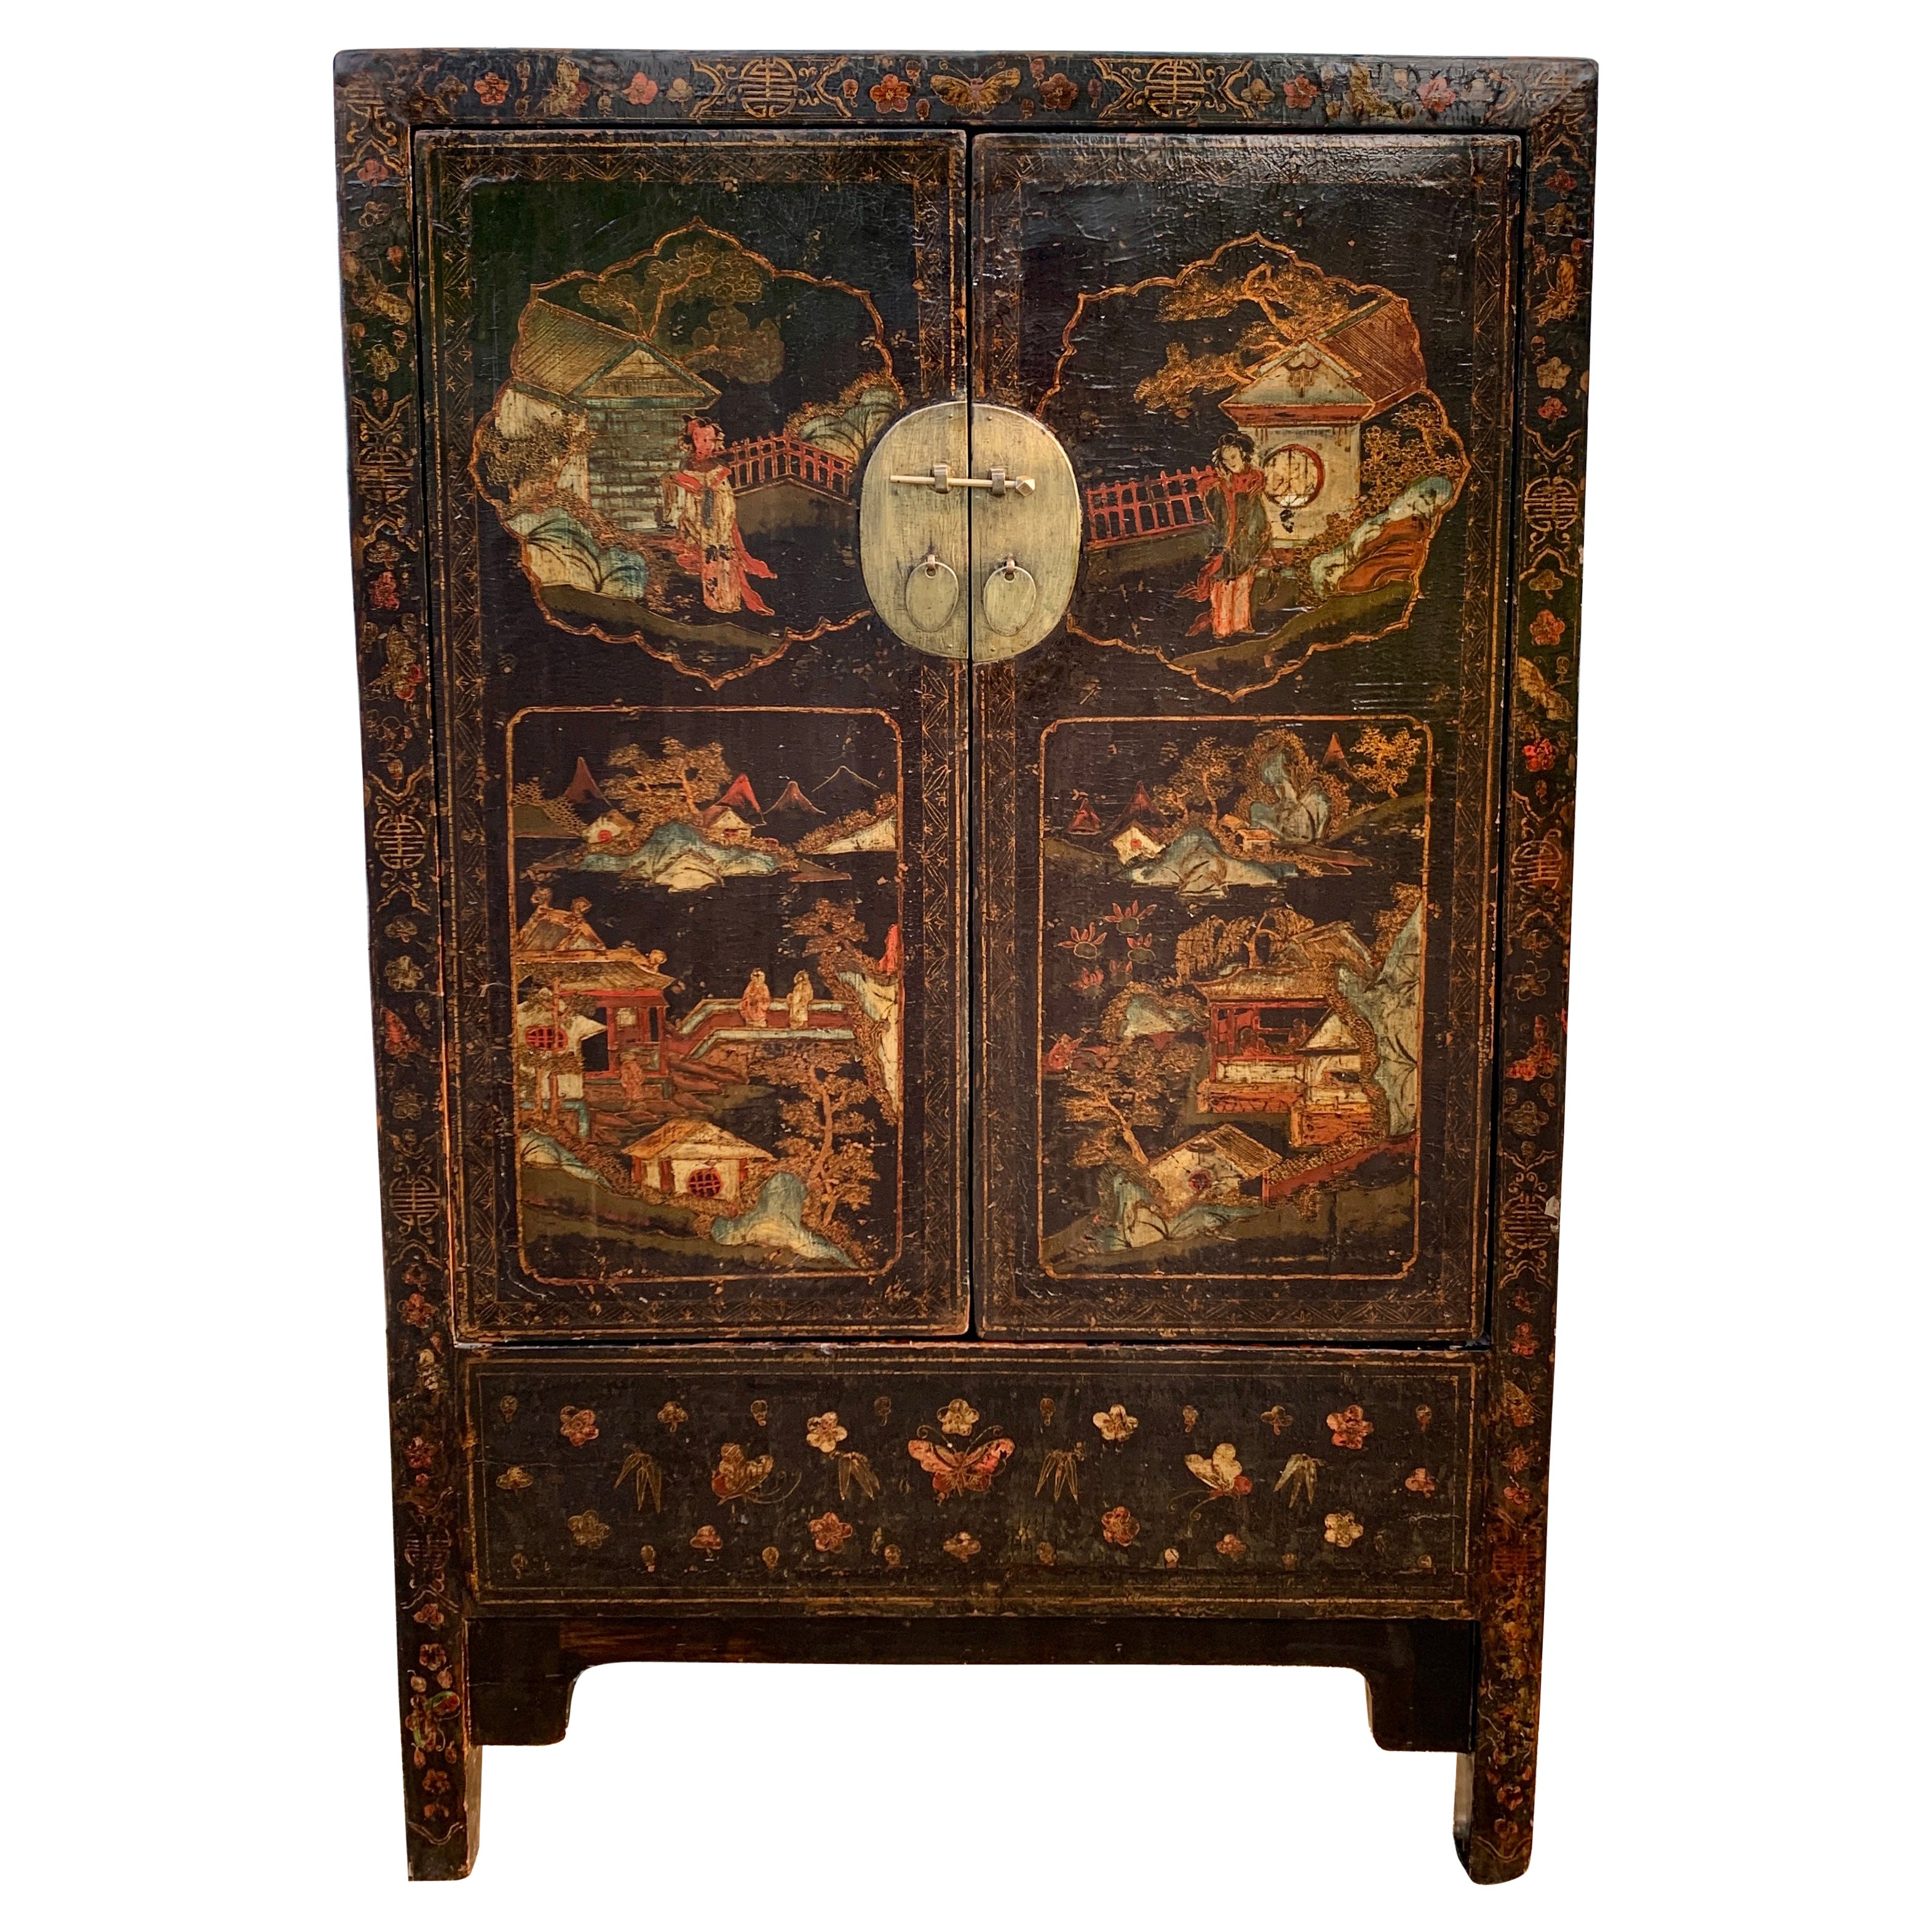 Antique Chinese Qing Dynasty Shanxi Painted Lacquer Cabinet, 19th Century For Sale